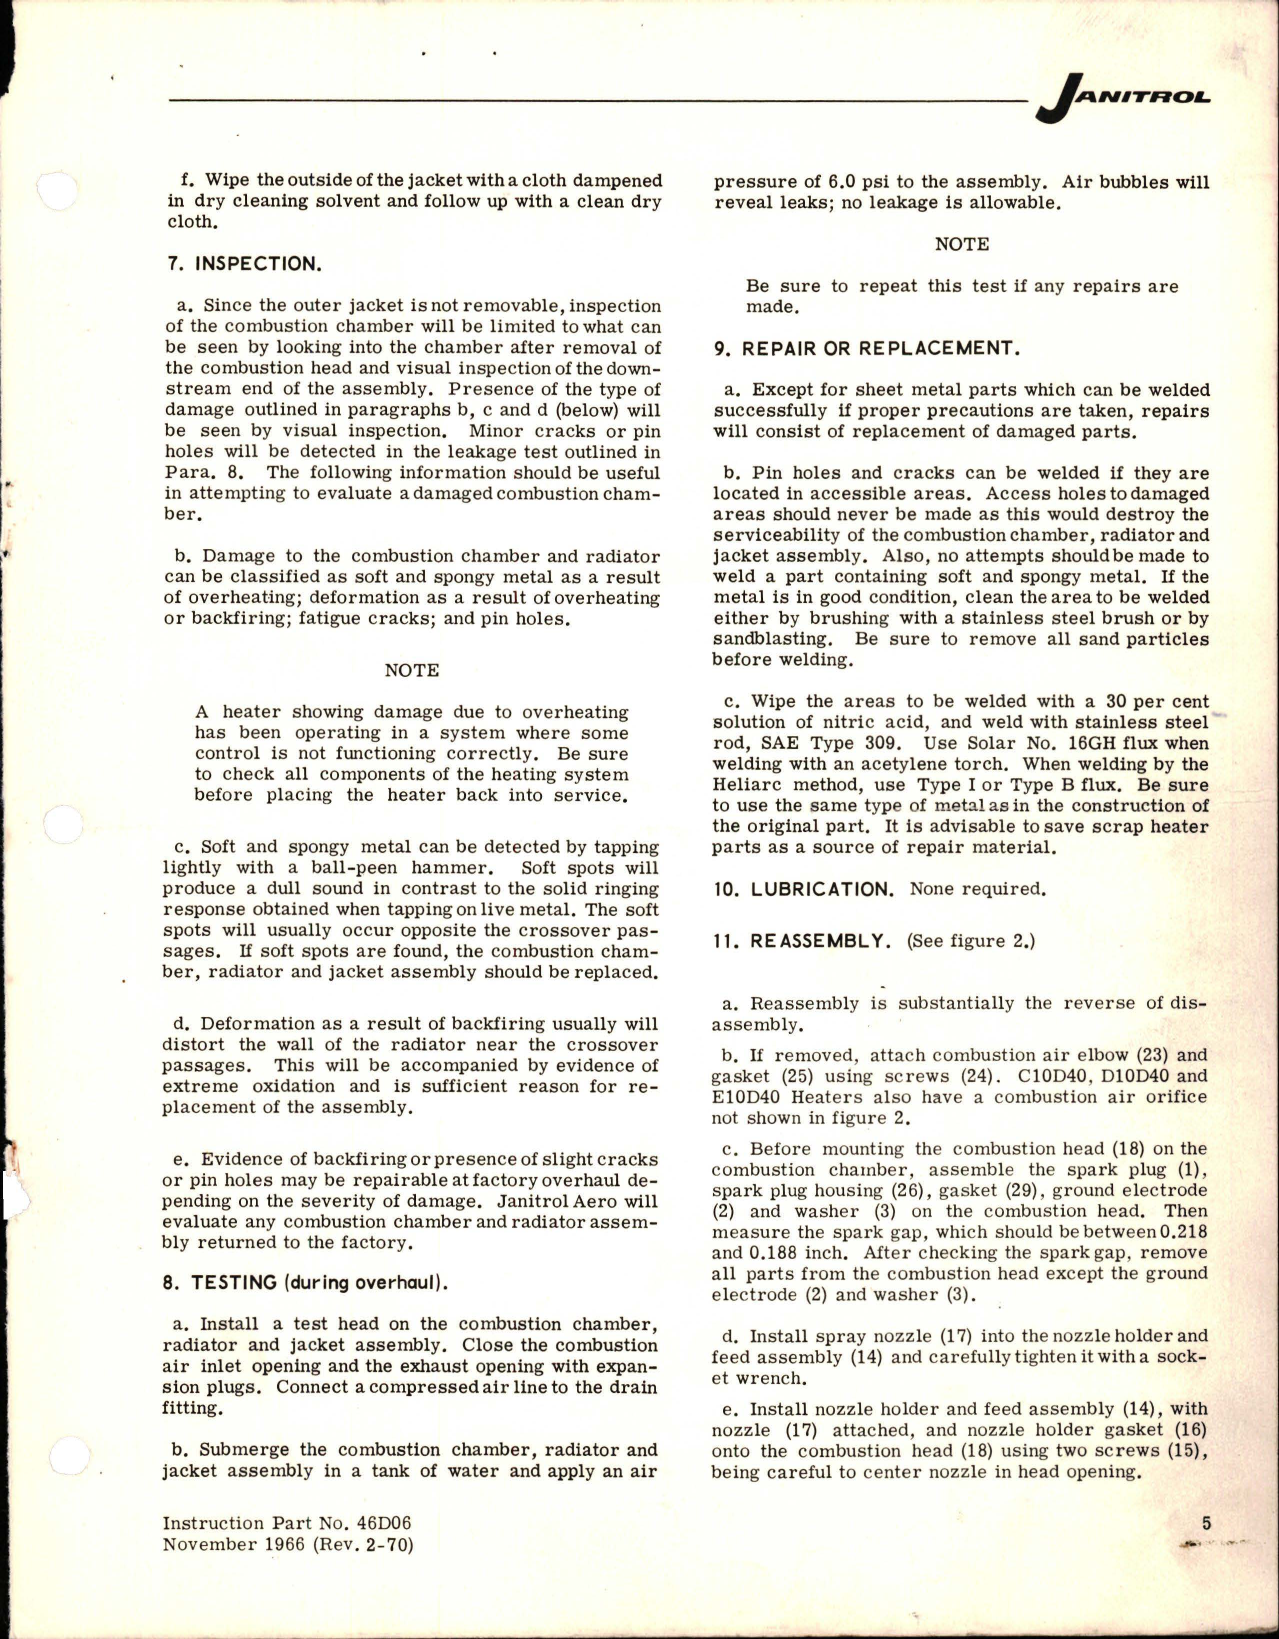 Sample page 5 from AirCorps Library document: Maintenance Instructions for Heater Assembly - Series 10D40 - Type S-100